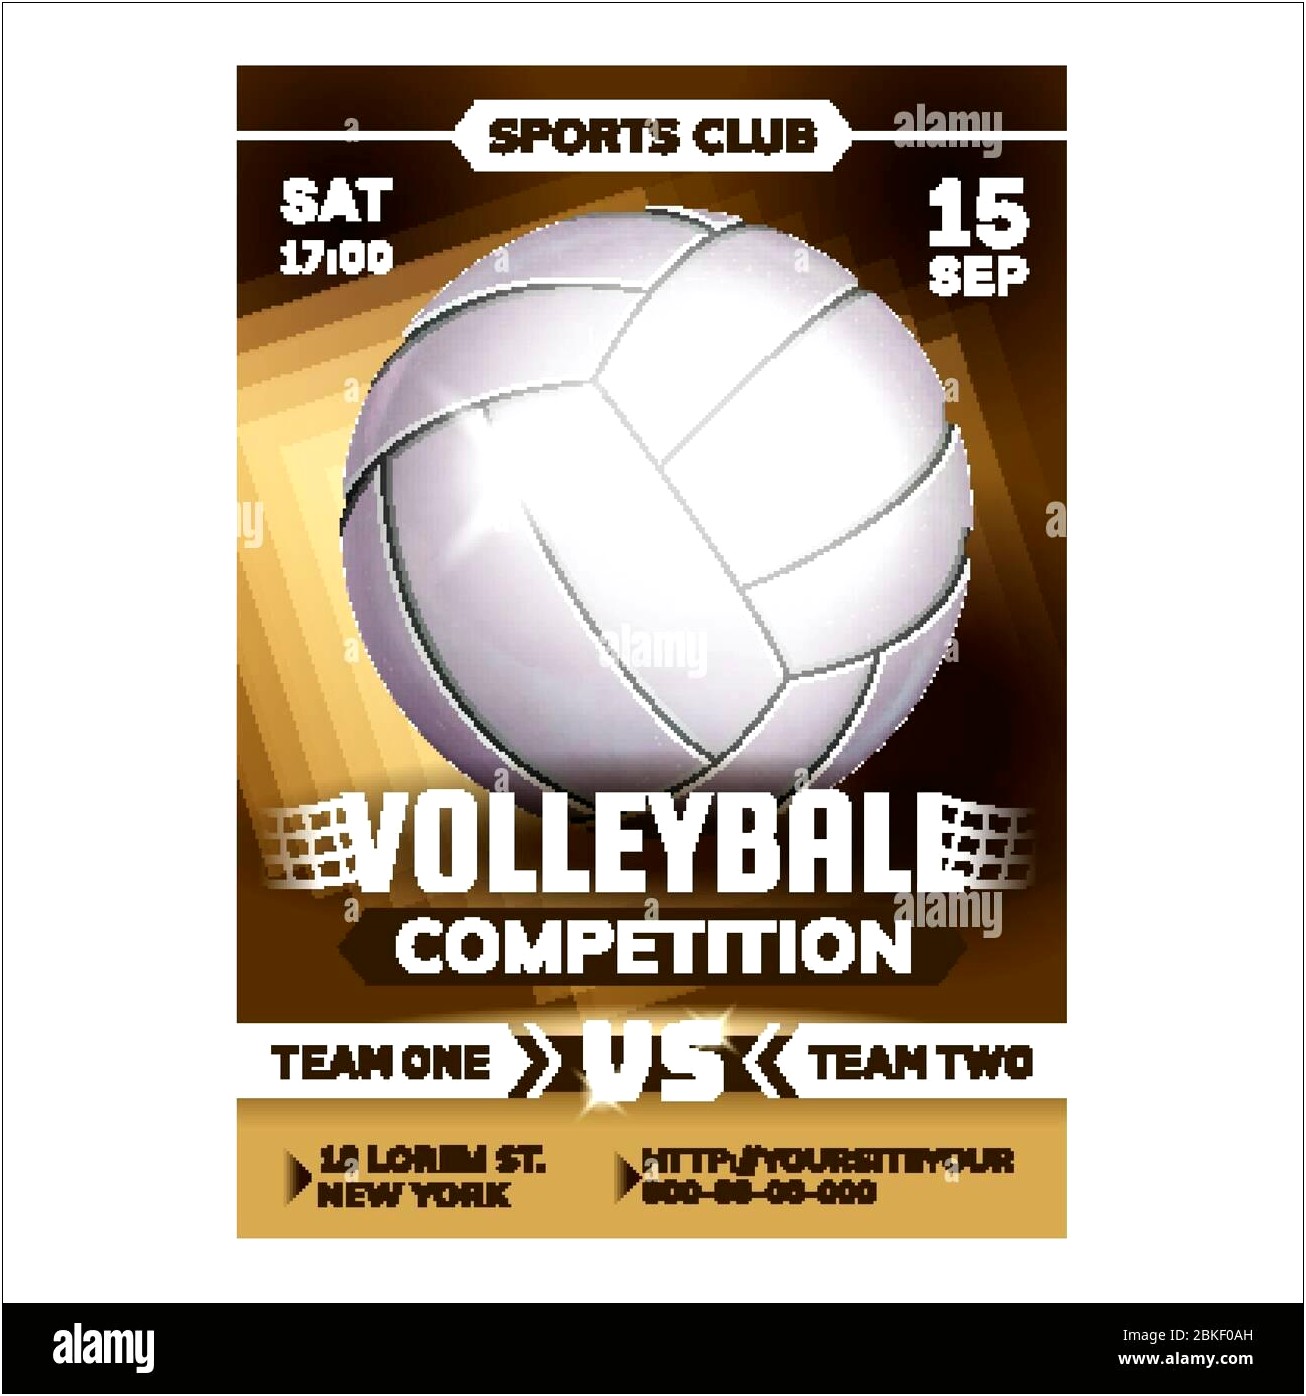 Club Volleyball Tryout Flyer Word Template